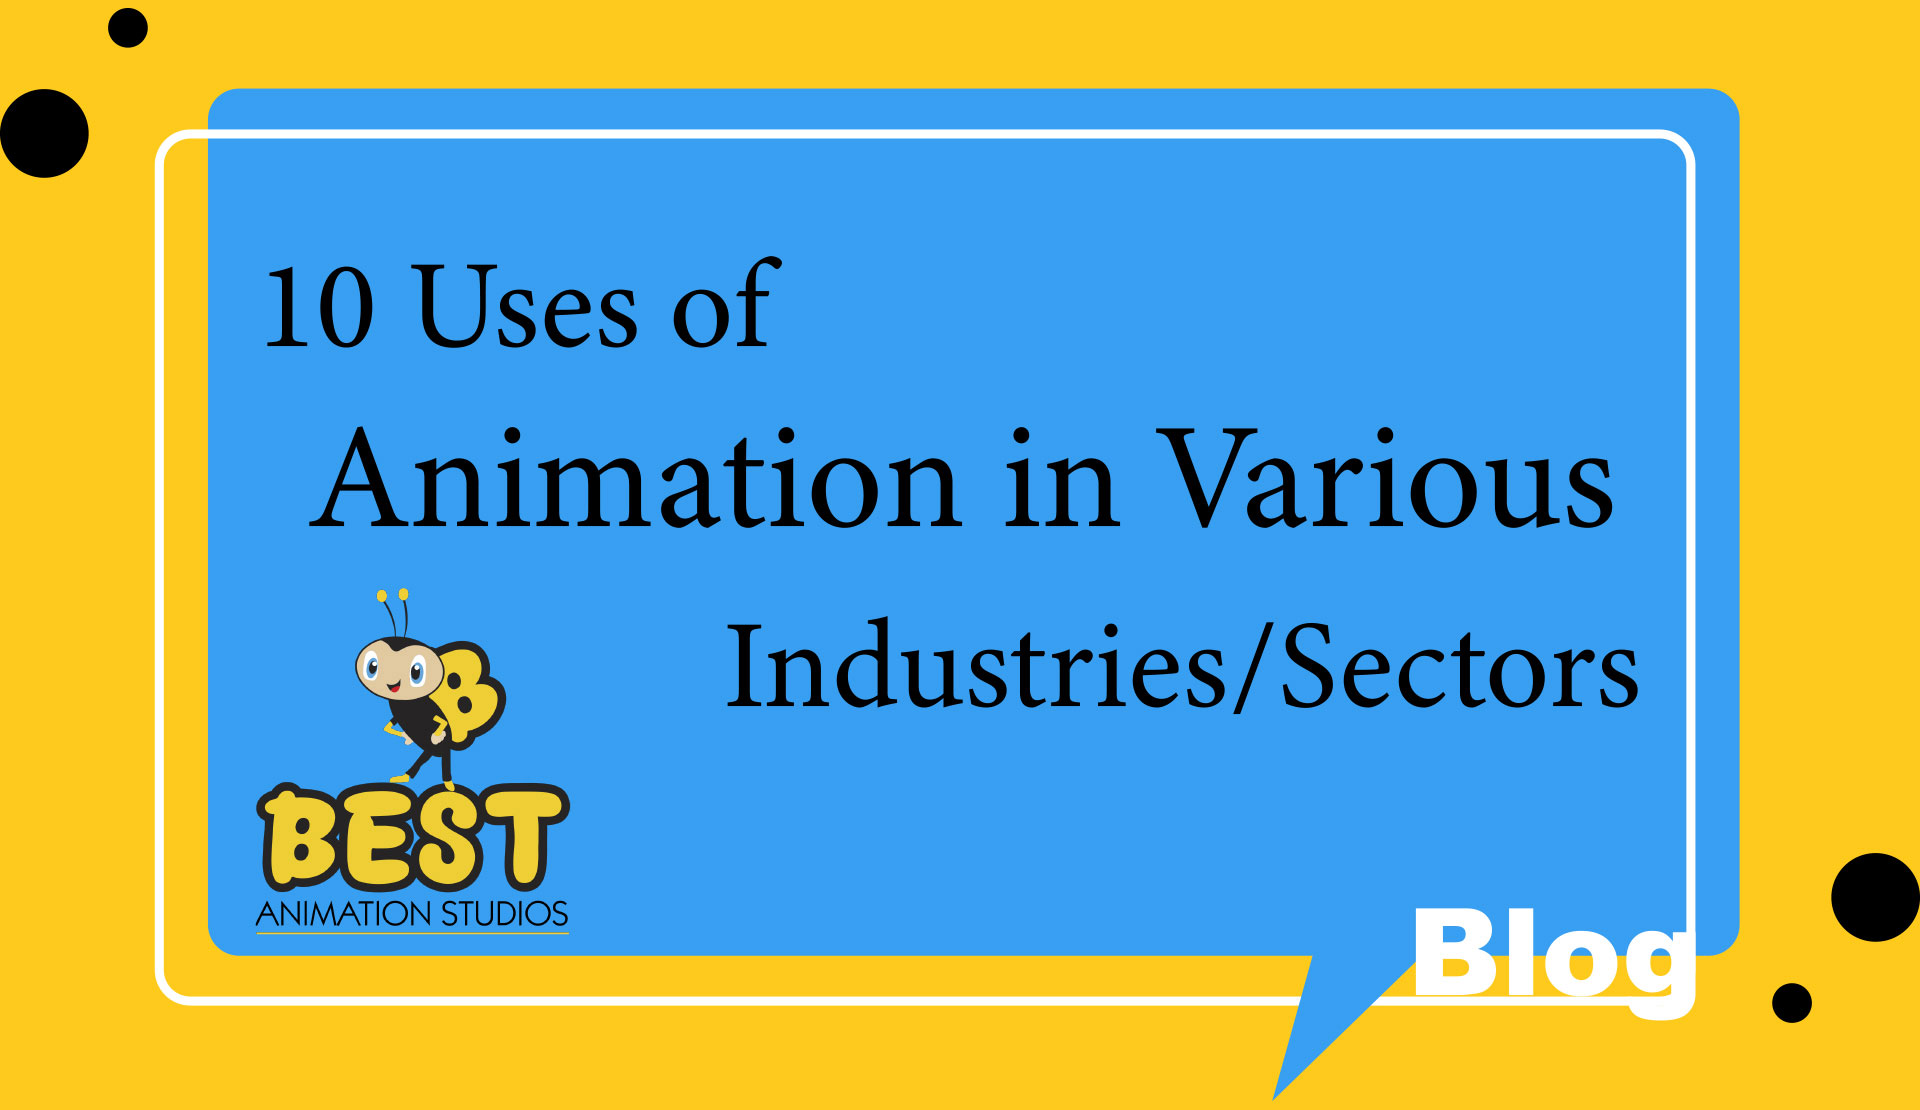 10 Uses of Animation in Various Industries/Sectors